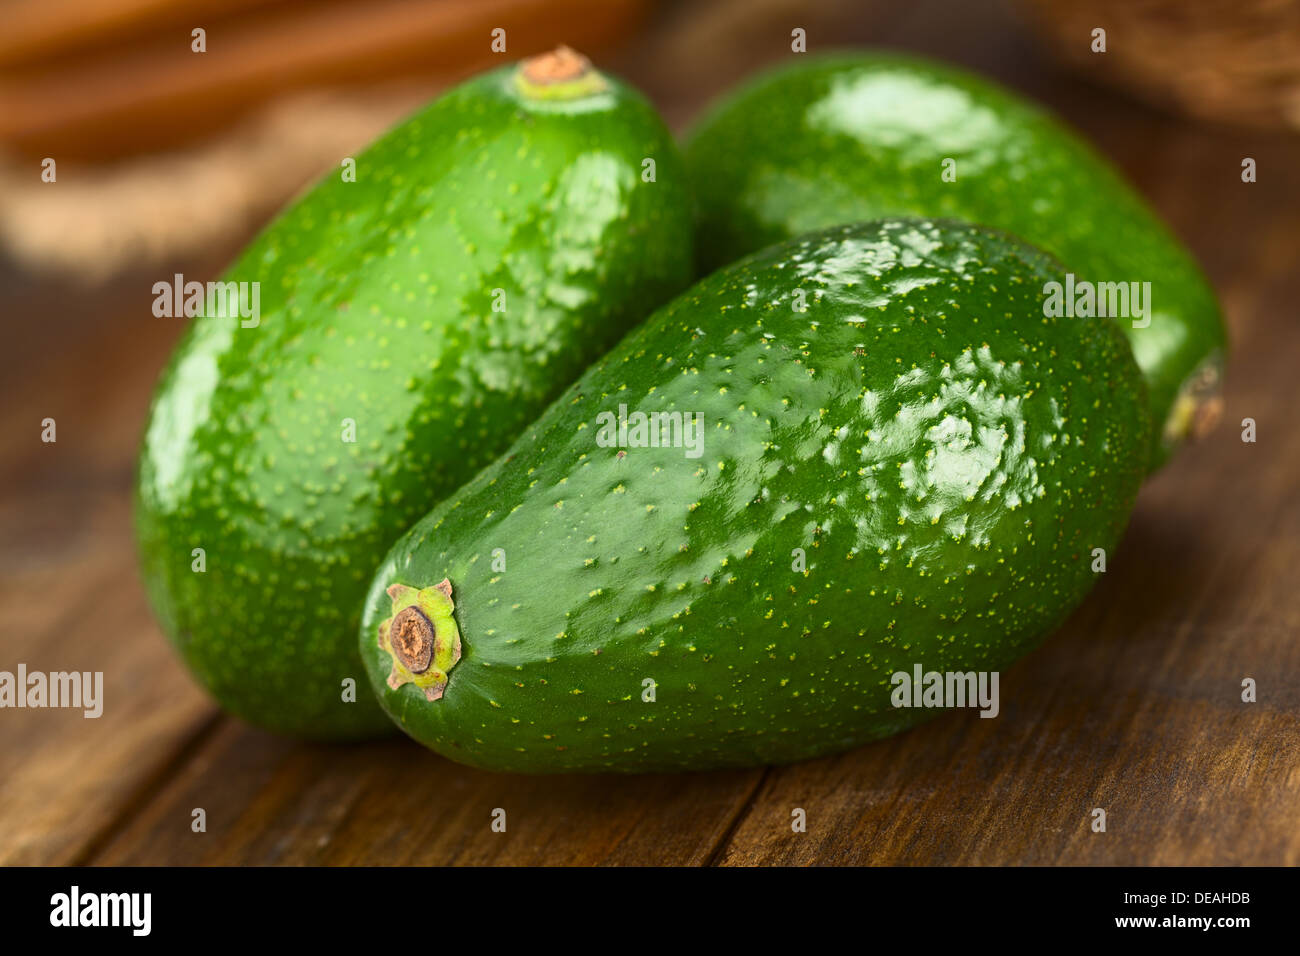 Three Avocados Fuerte on dark wood (Selective Focus, Focus on the front) Stock Photo